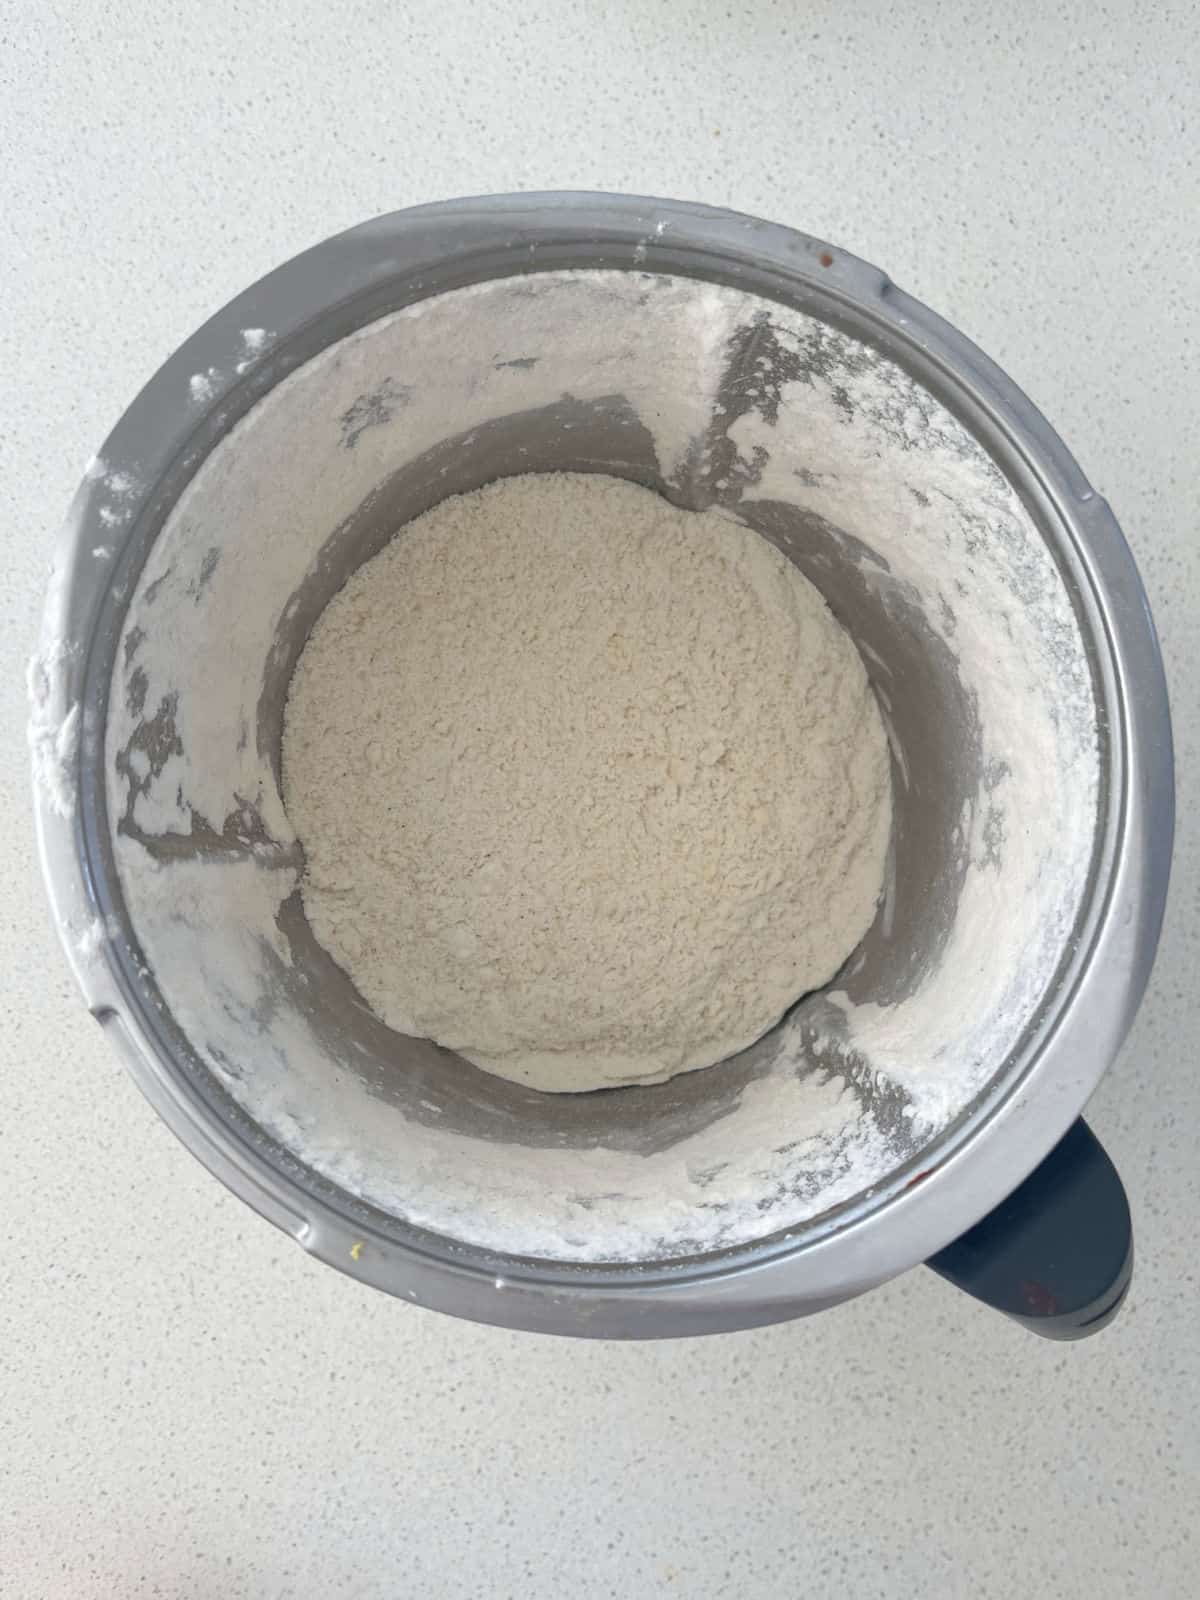 Self-raising flour combined with butter in a thermomix bowl.